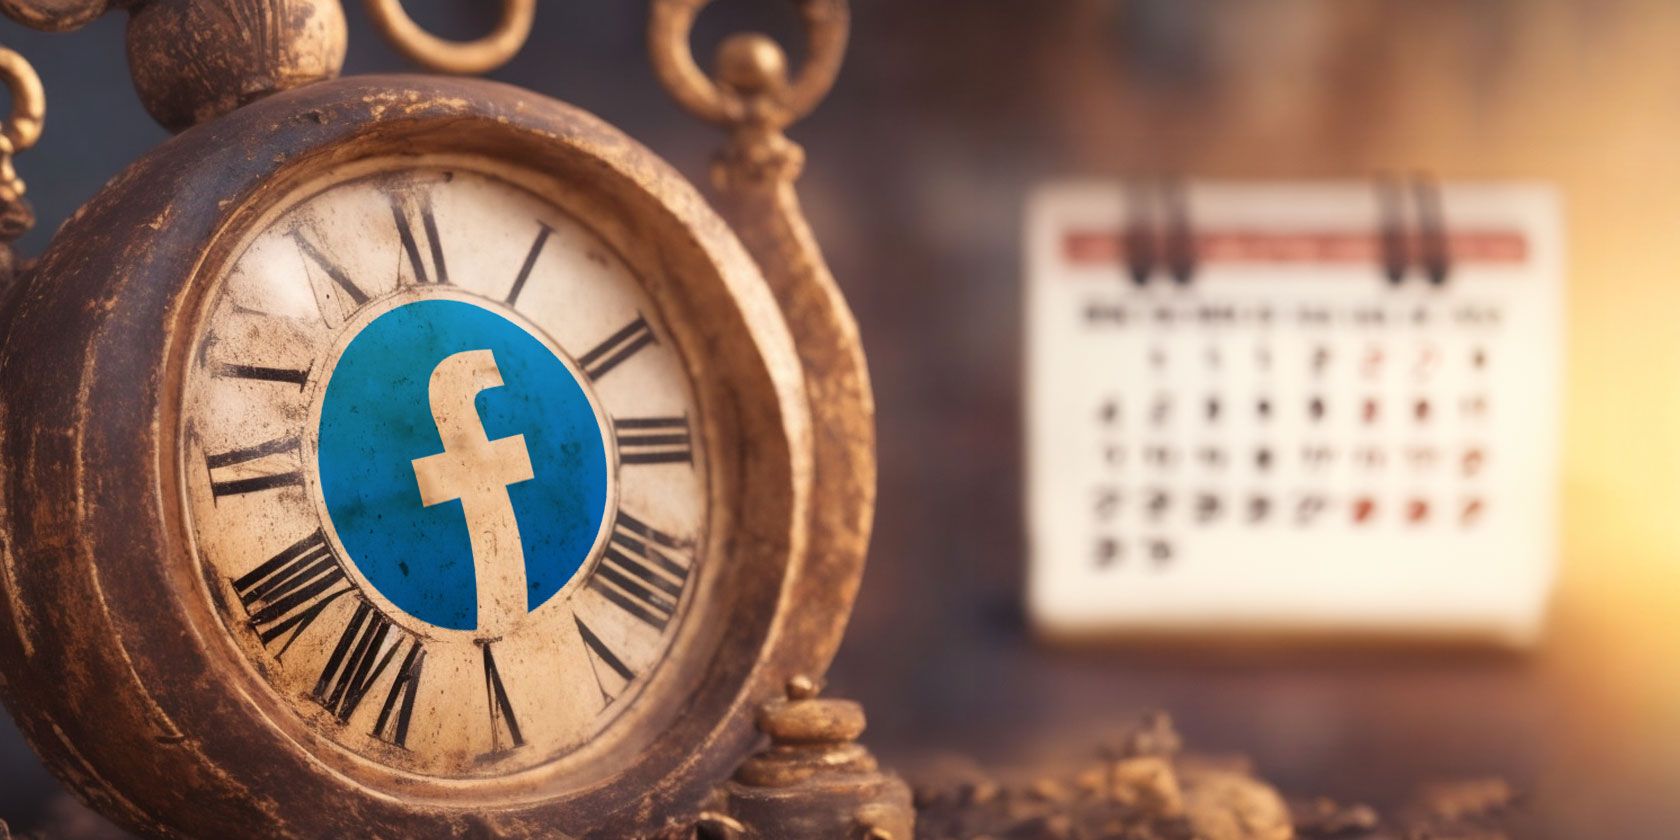 Facebook logo on an old clock with calendar on the background